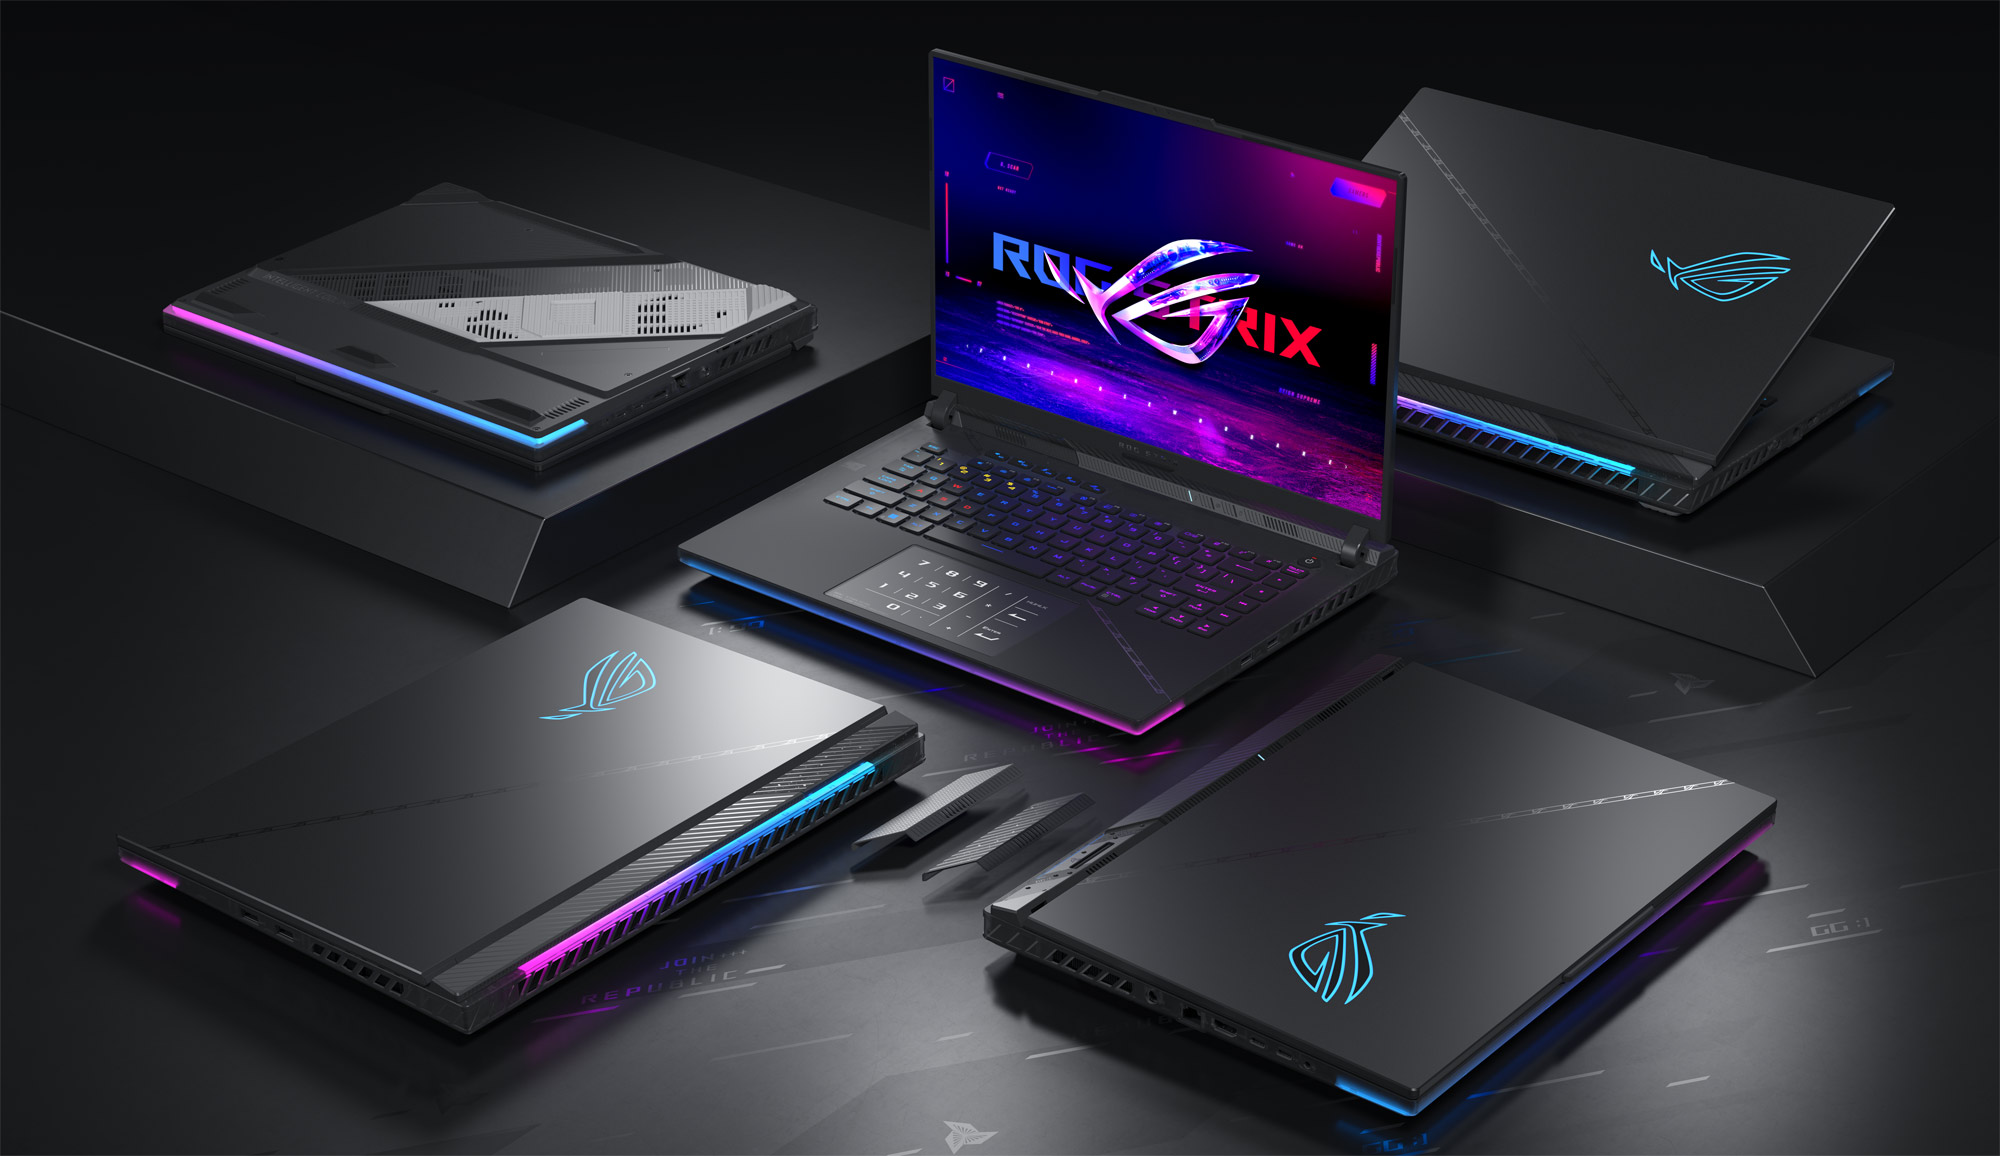 Leave your opponents in the dust with the brand-new ROG Strix